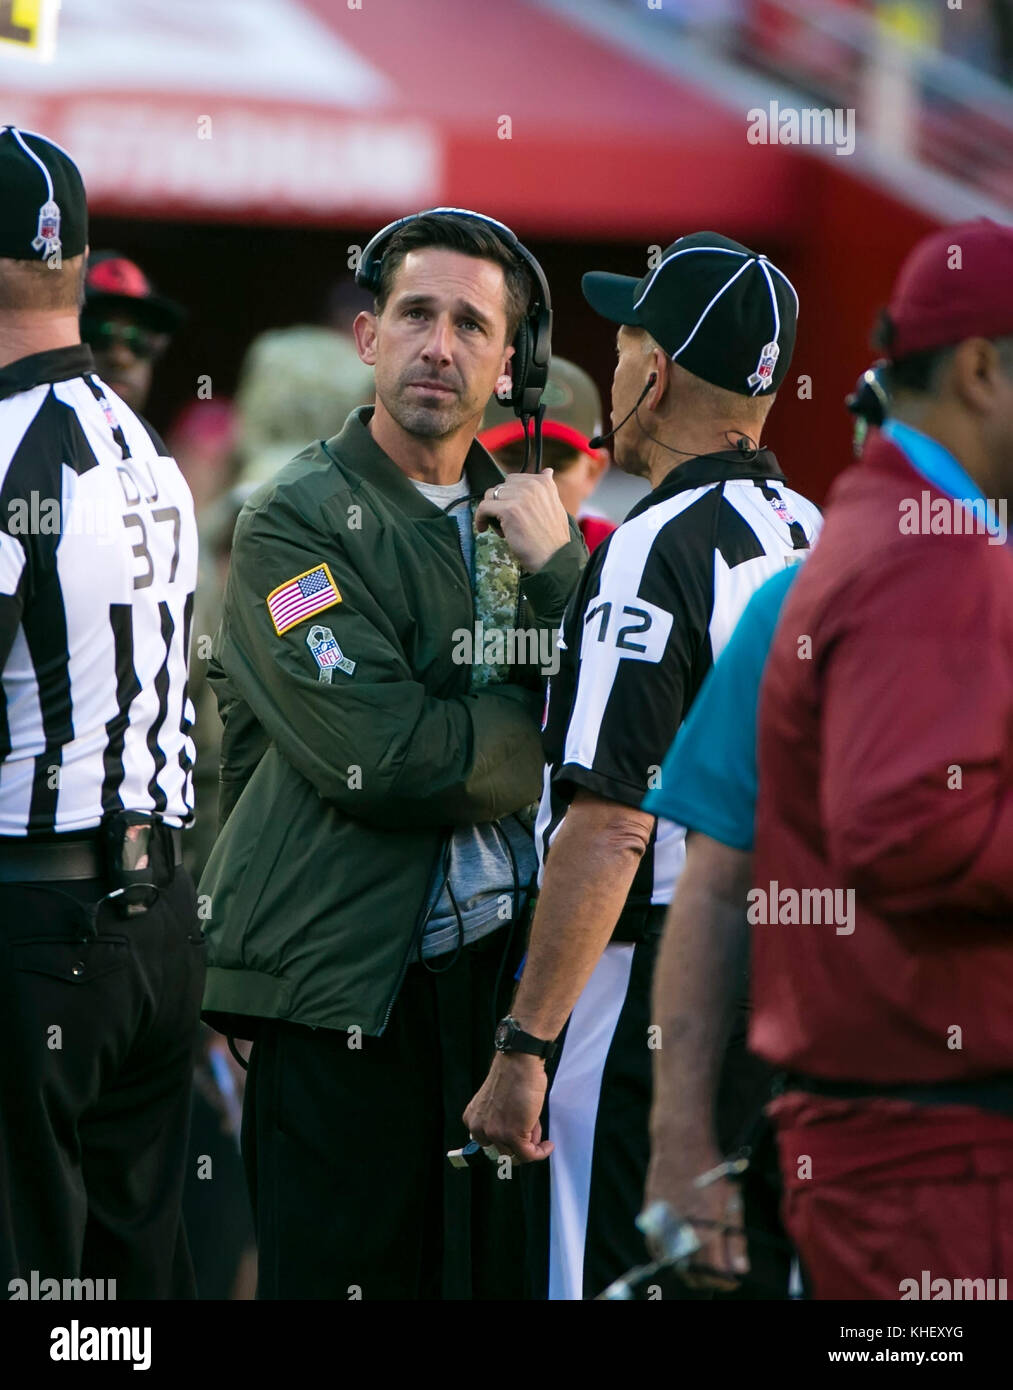 Santa Clara, CA. 12th Nov, 2017. San Francisco 49ers head coach Kyle Shanahan speaks to an official during the NFL football game between the New York Giants and the San Francisco 49ers at Levi's Stadium in Santa Clara, CA. The 49ers defeated the Giants 31-21.Damon Tarver/Cal Sport Media/Alamy Live News Stock Photo